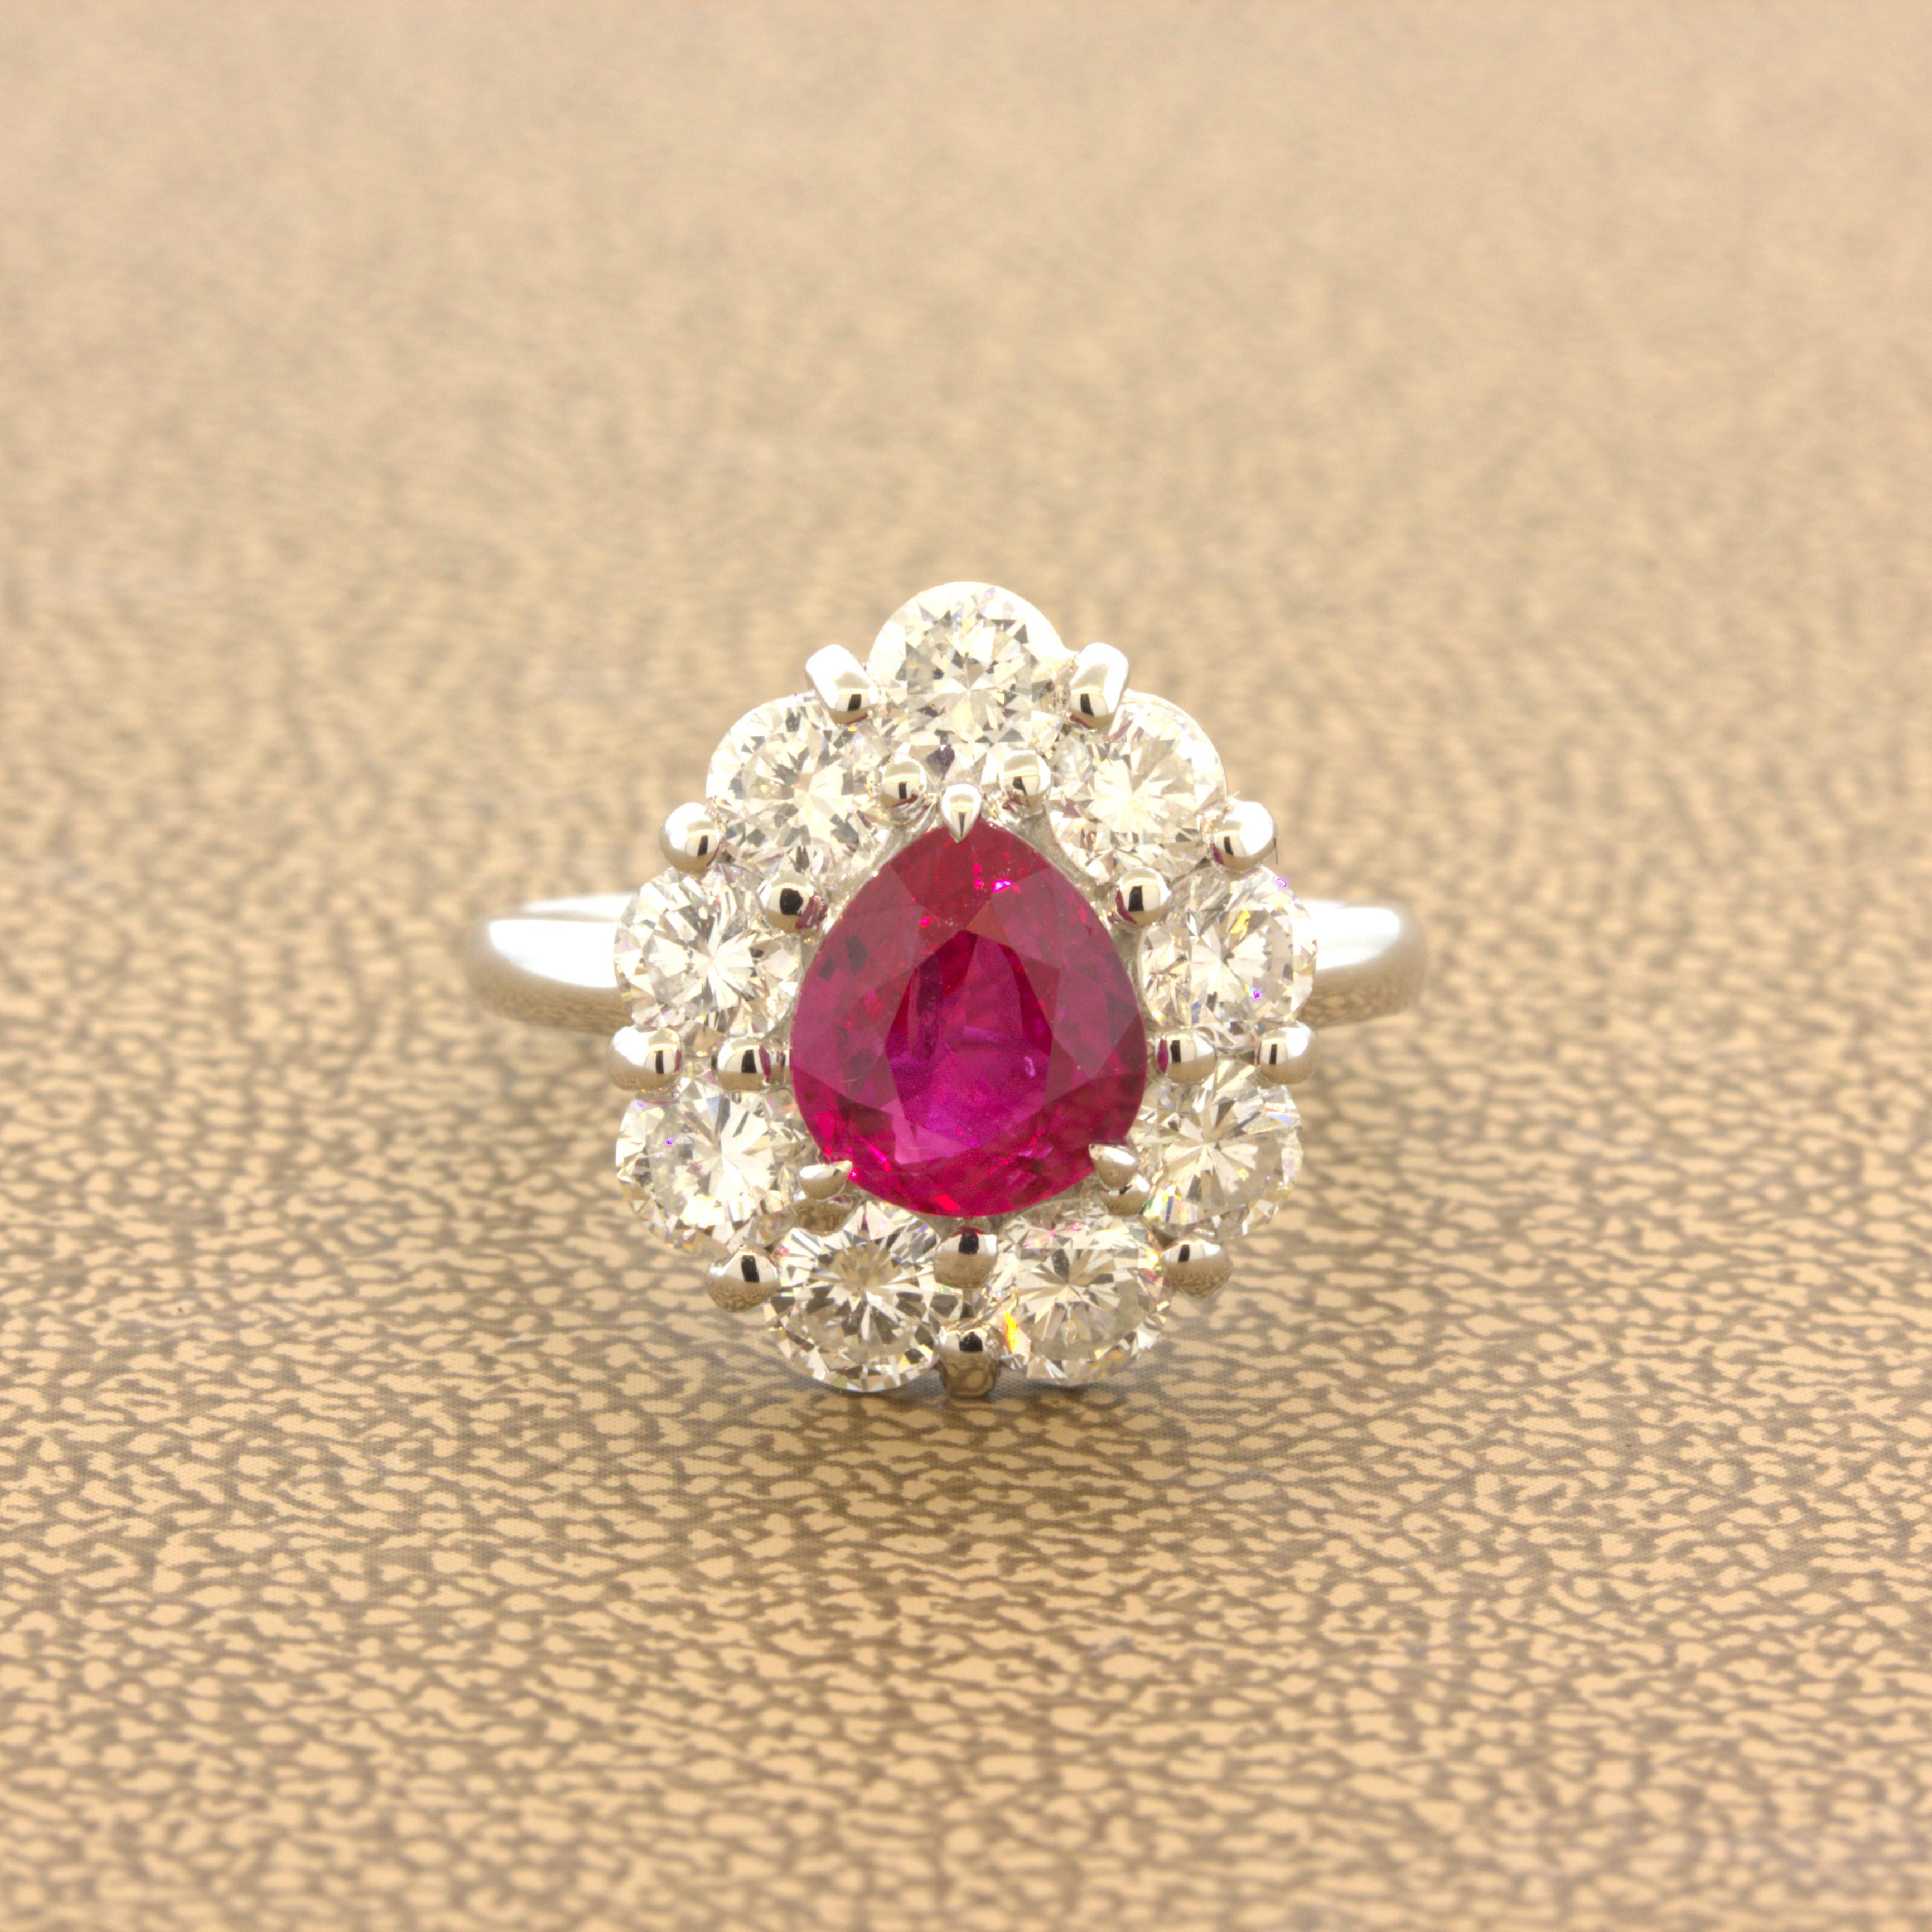 A super gem Burmese ruby takes center stage. It weighs 1.79 carats and has a rich and vibrant vivid pinkish-red color that is full of life and brilliance. The color of the ruby pops with excellent brightness. It is complemented by 1.84 carats of